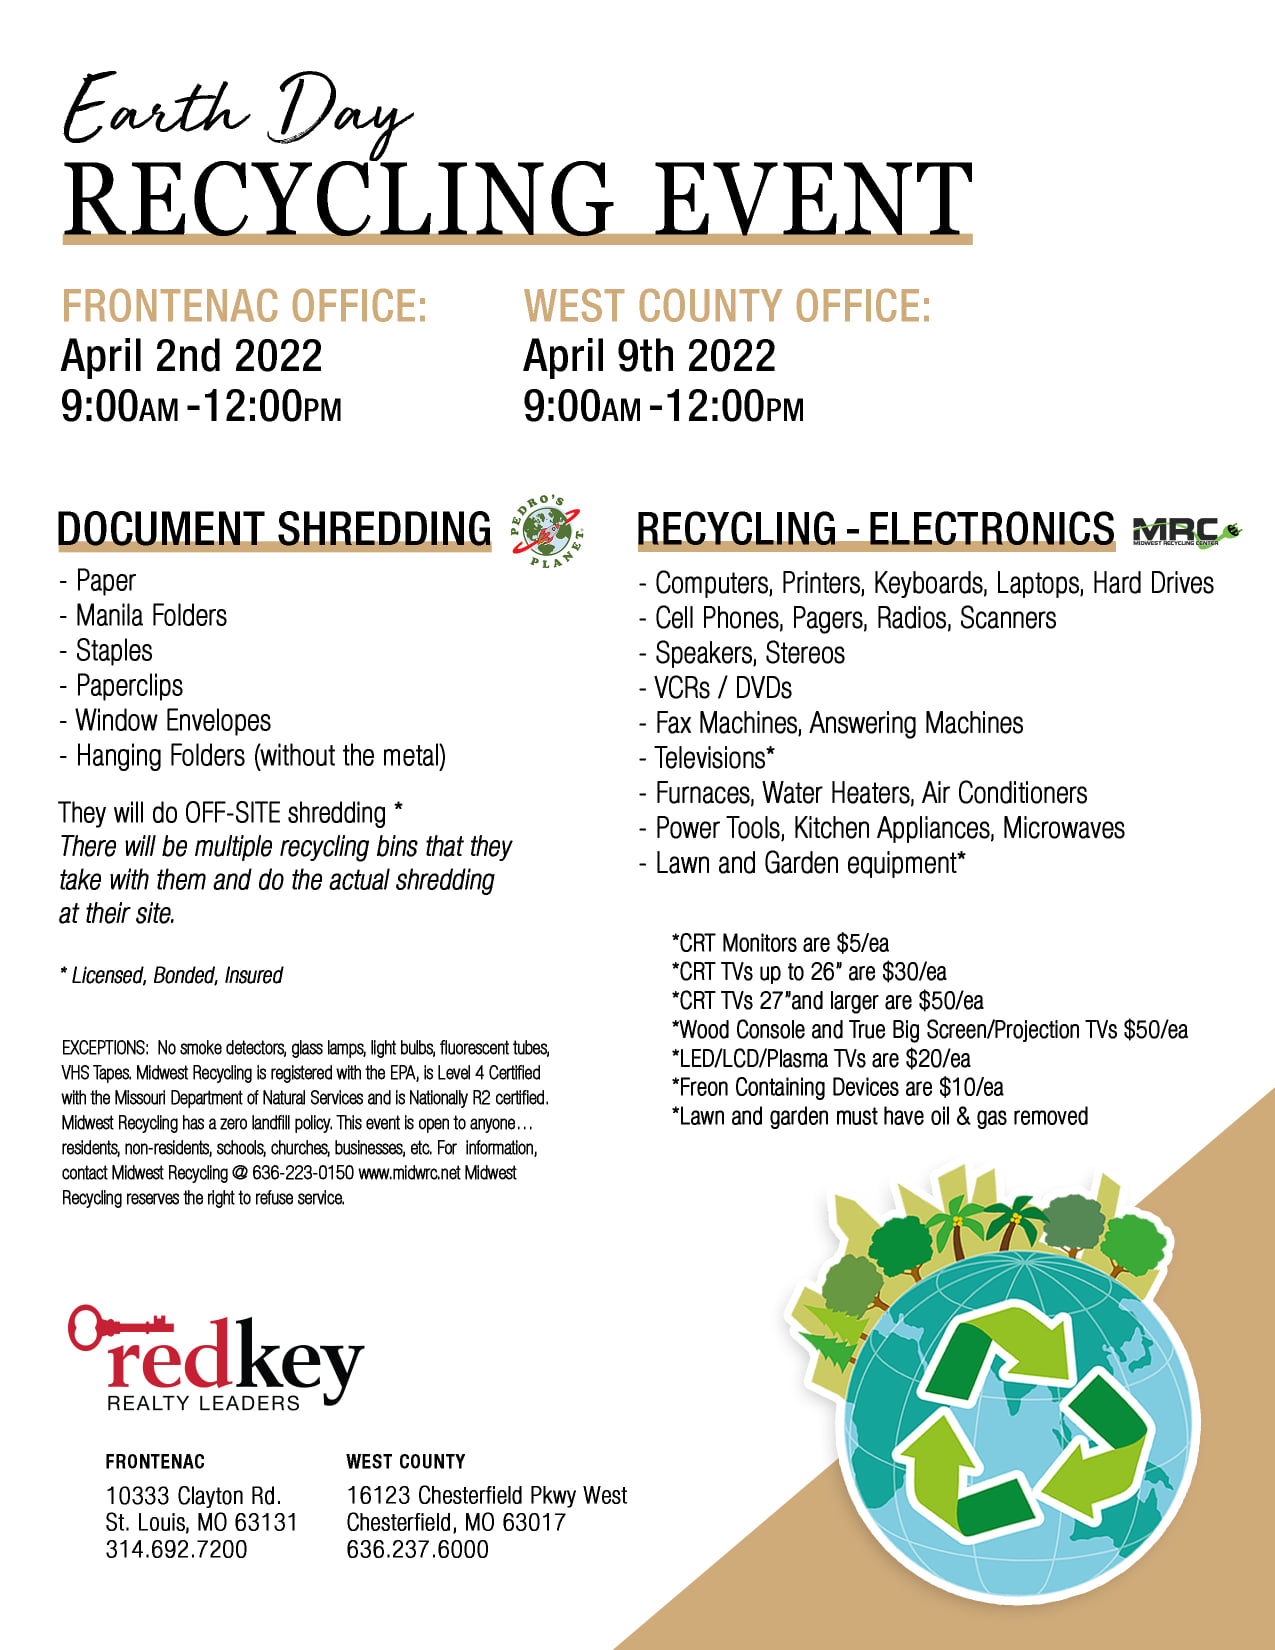 Earth Day Recycling Event